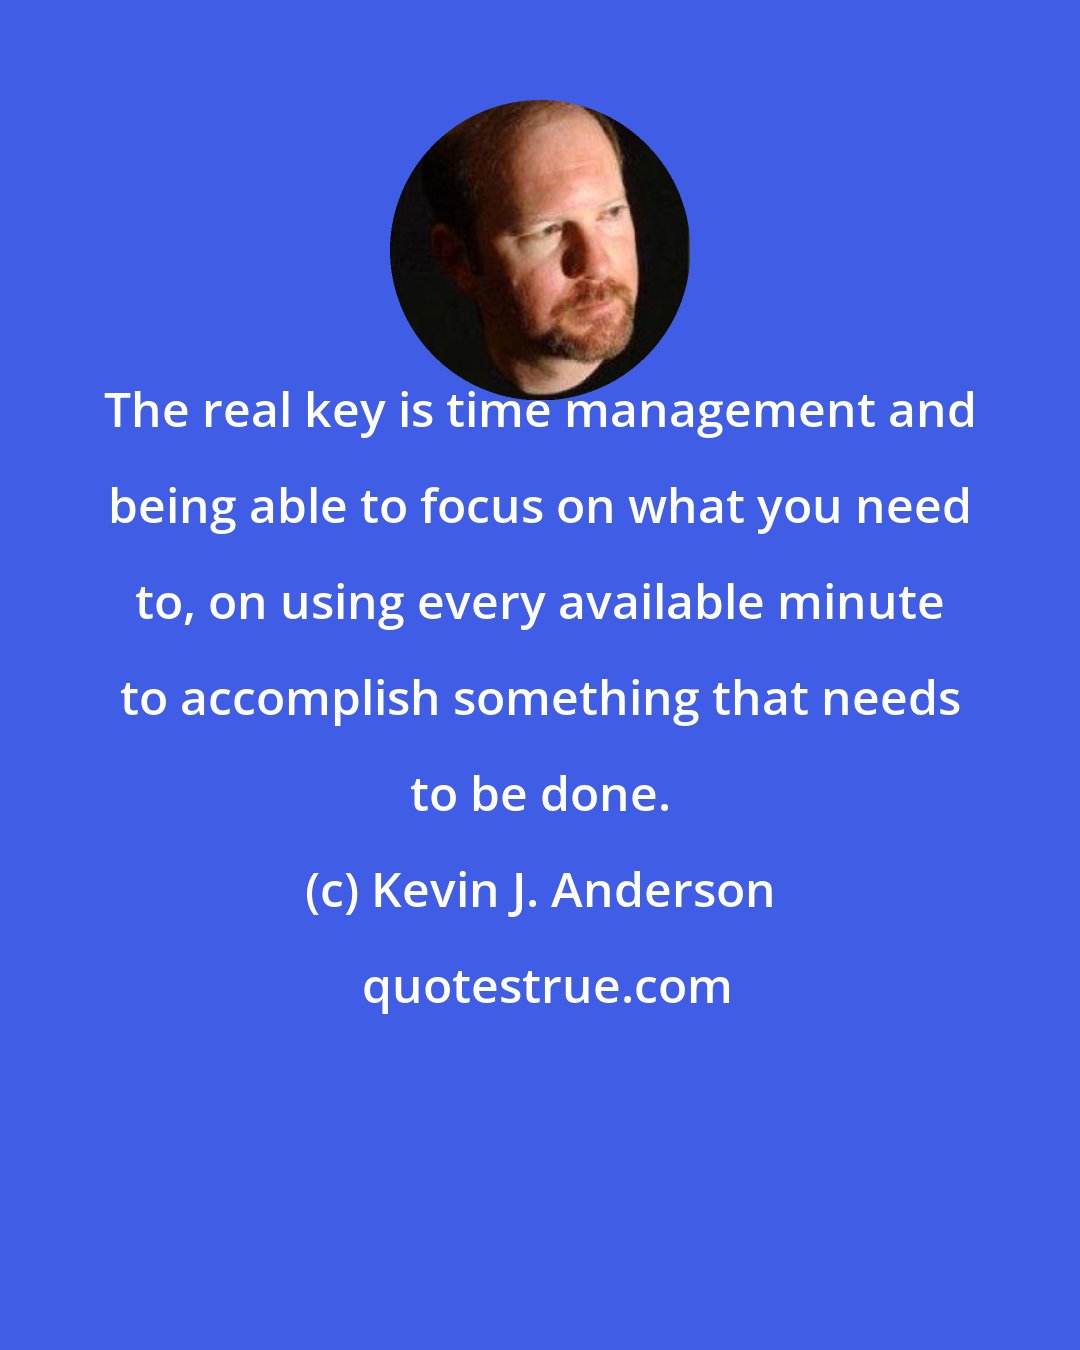 Kevin J. Anderson: The real key is time management and being able to focus on what you need to, on using every available minute to accomplish something that needs to be done.